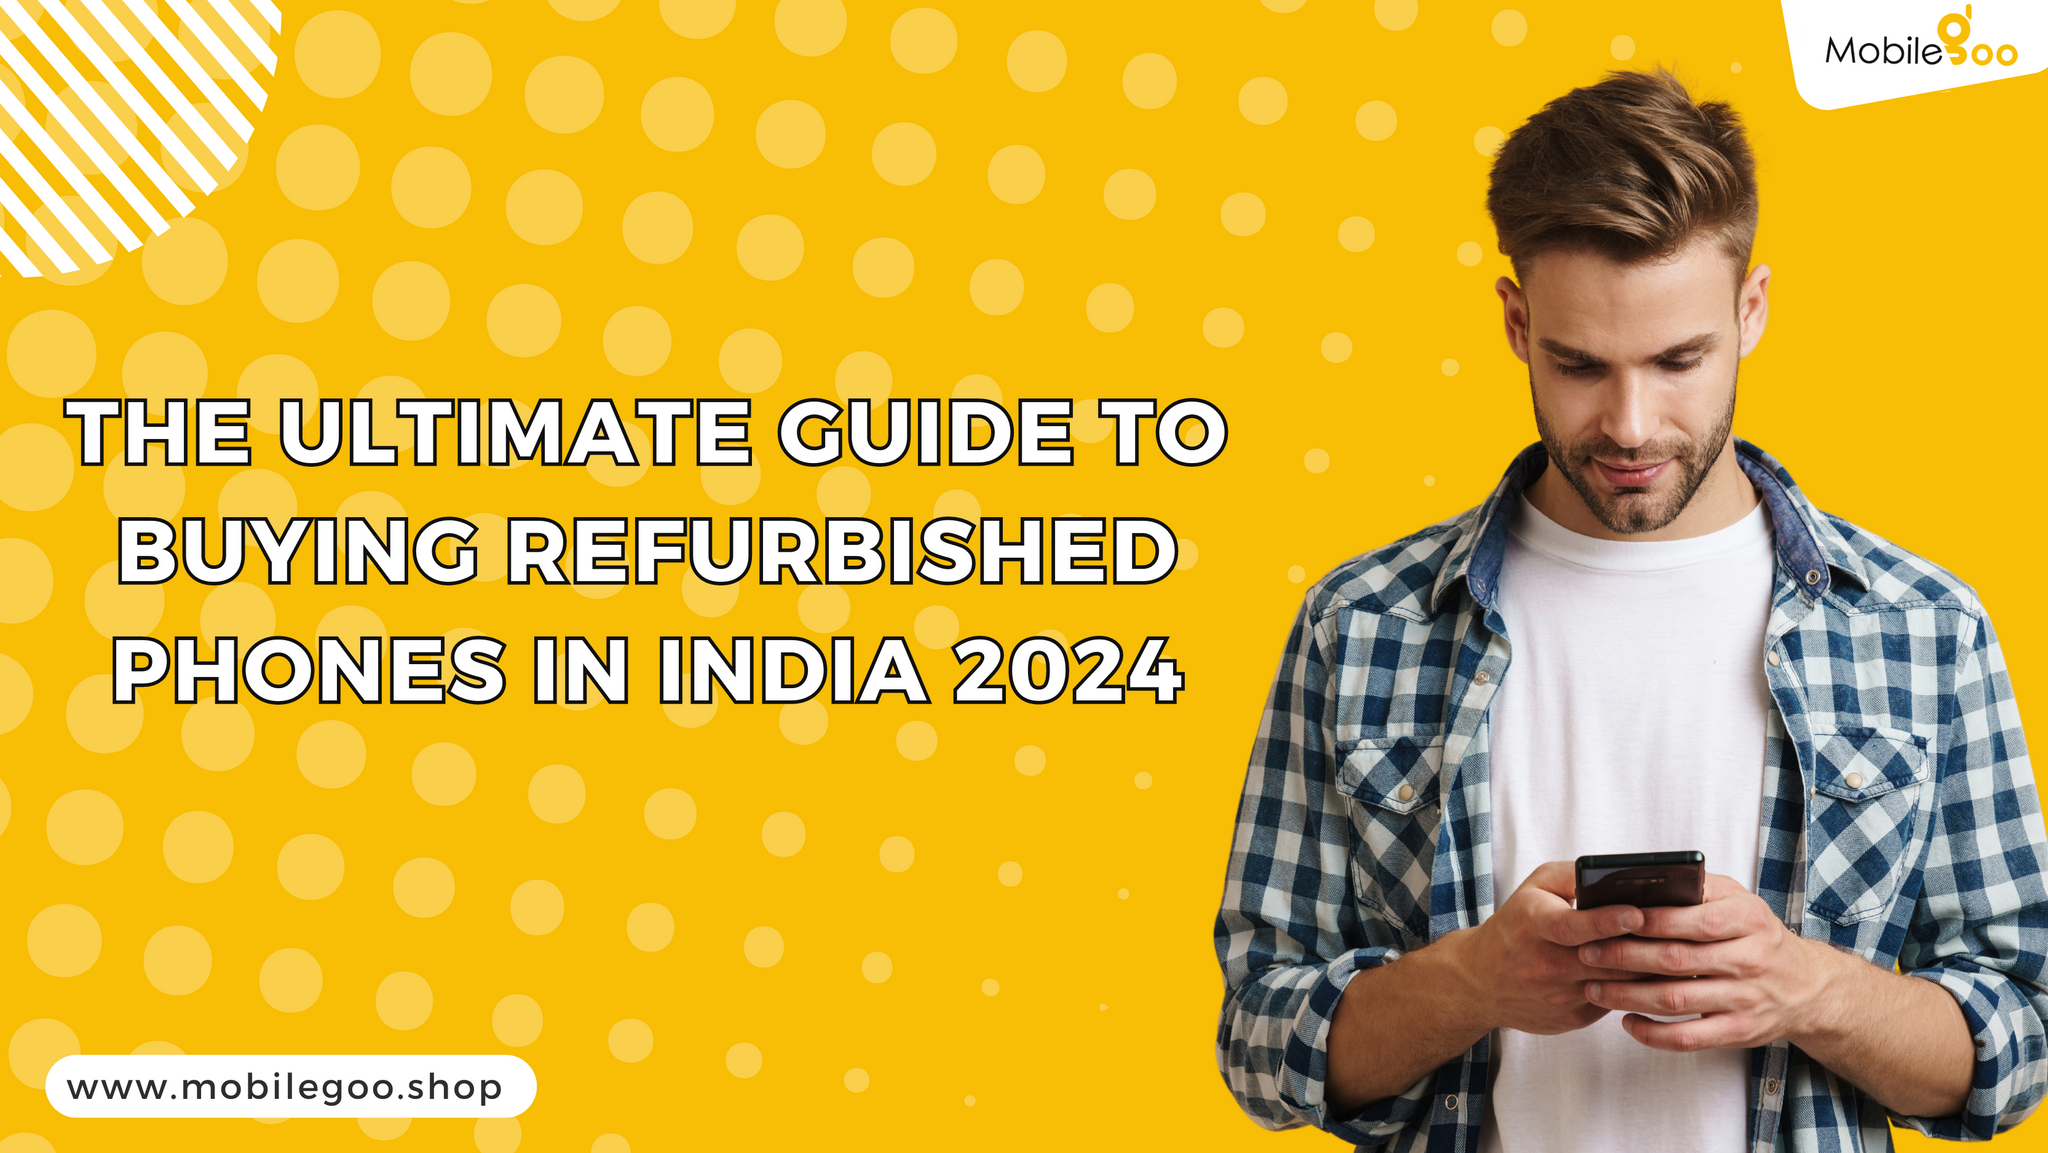 The Ultimate Guide to Buying Refurbished Phones in India 2024